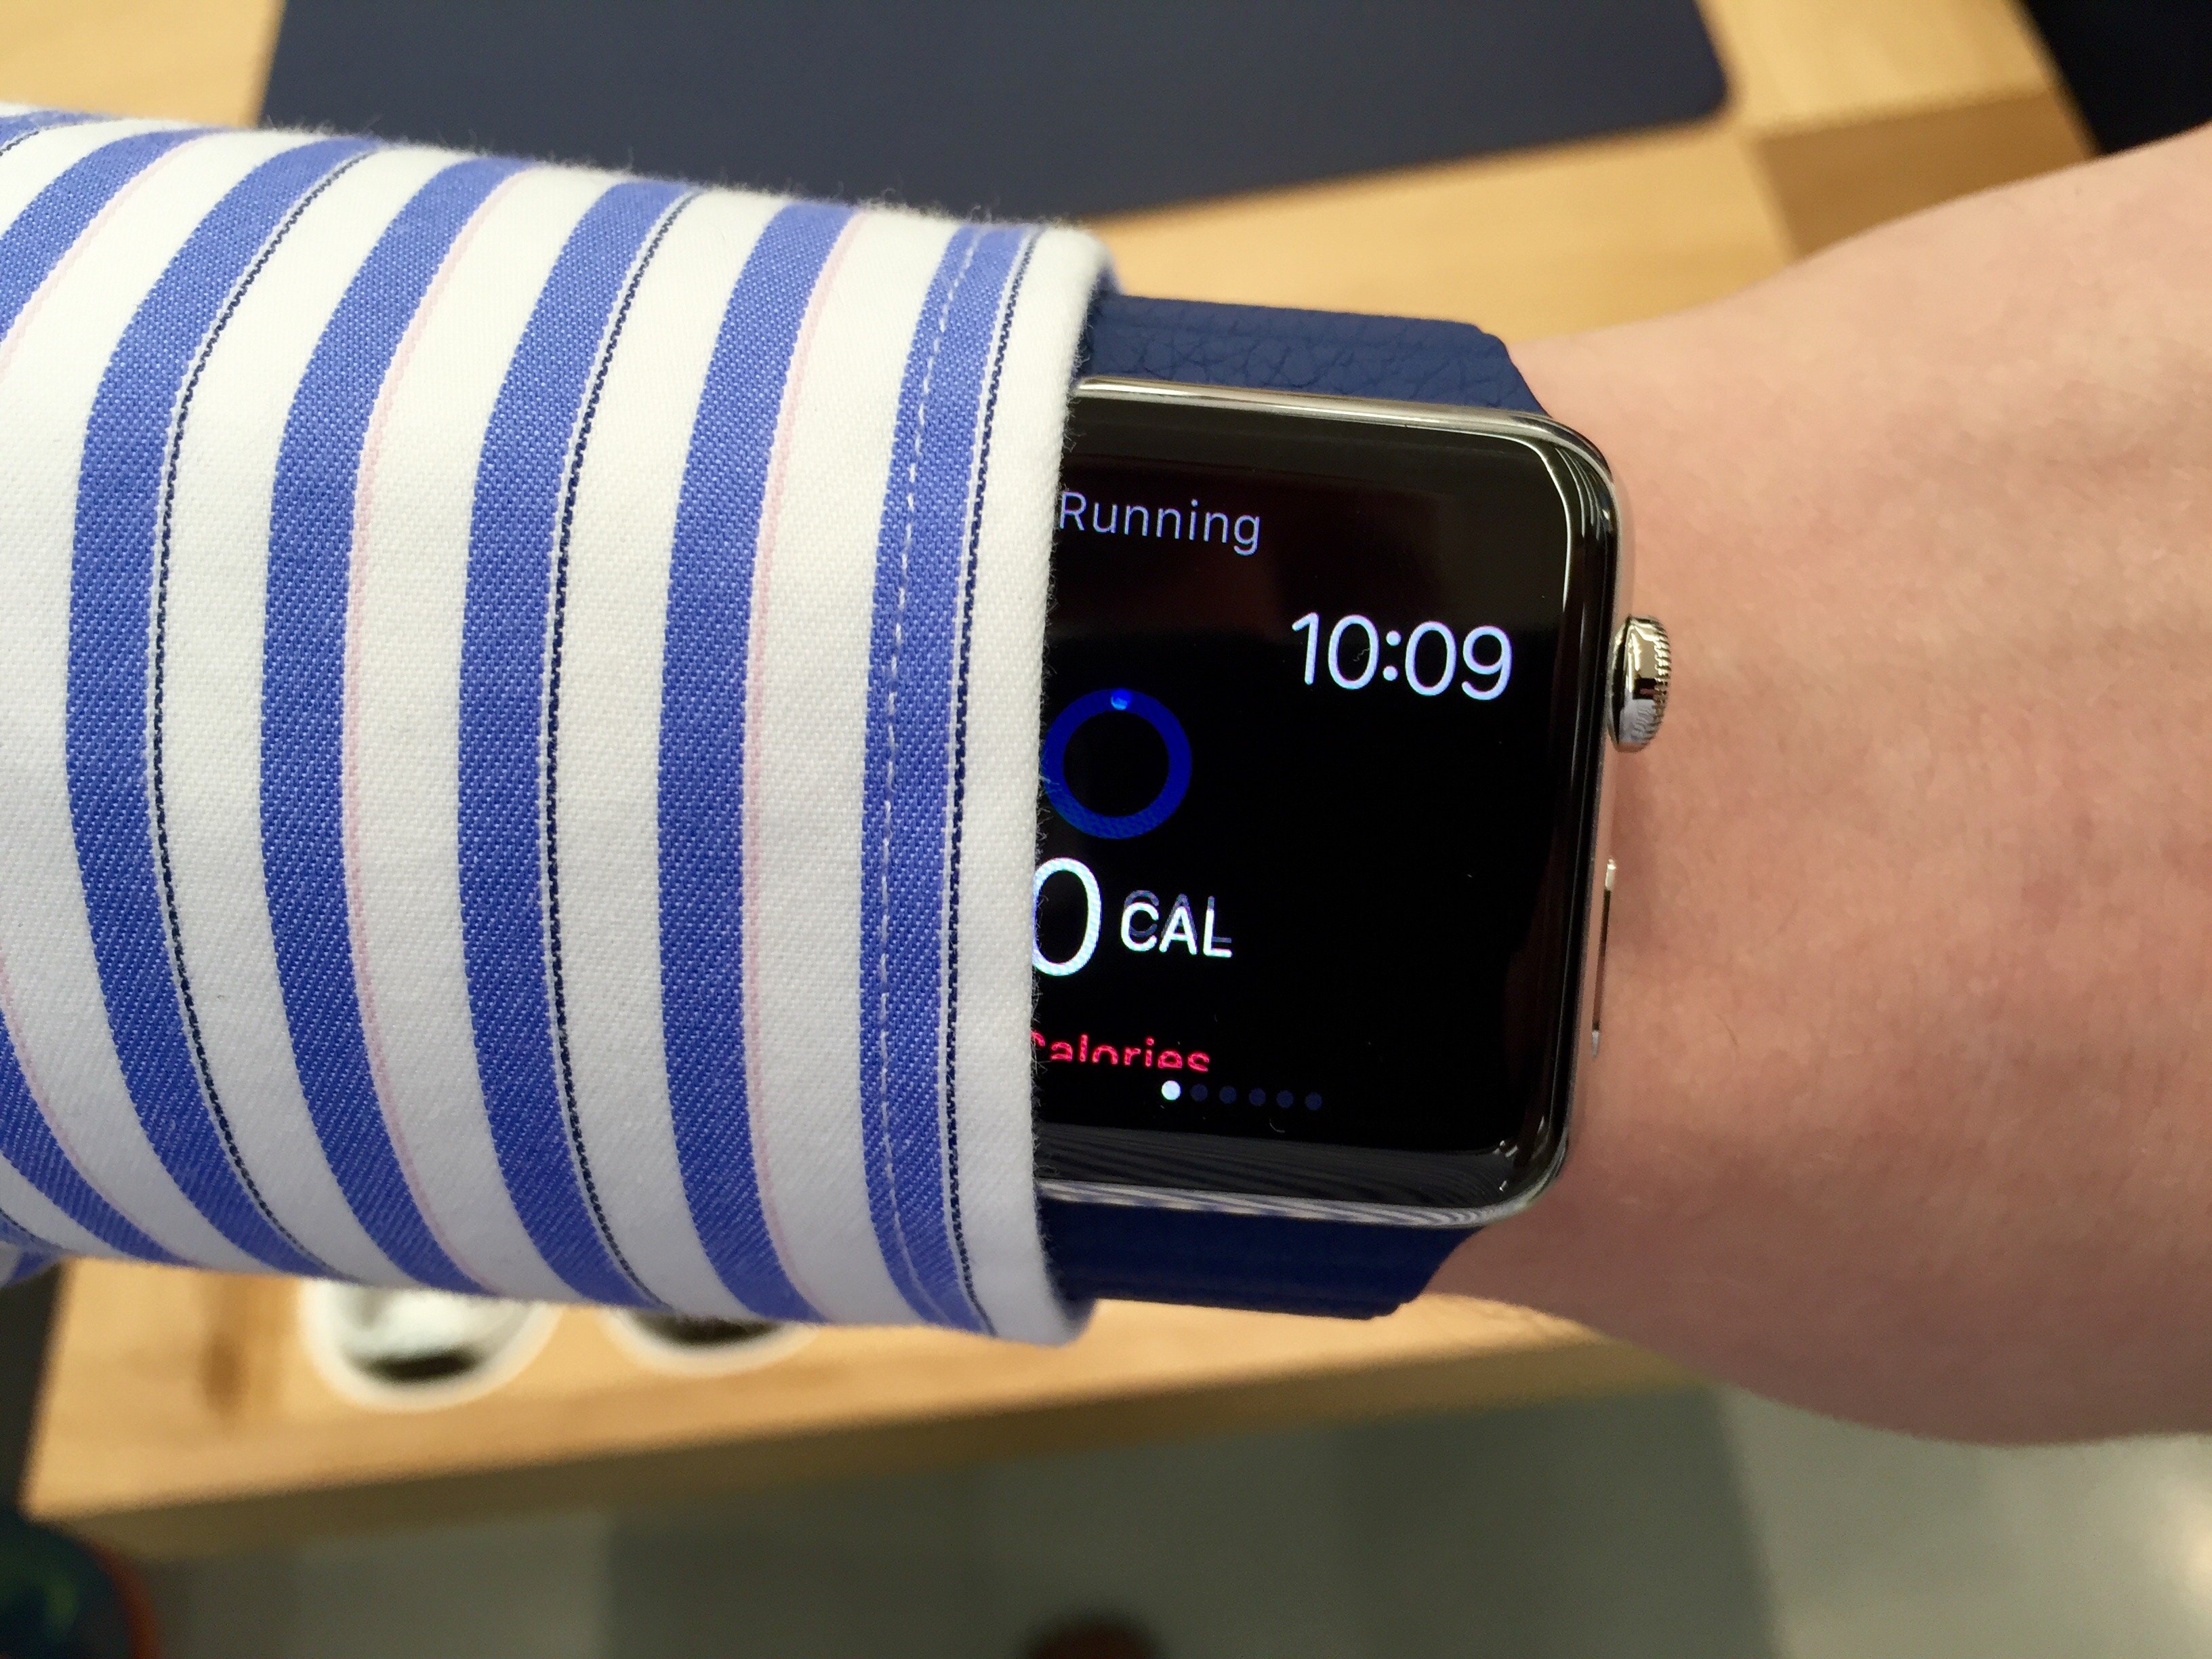 Here's what I learned after using the Apple Watch for an hour.